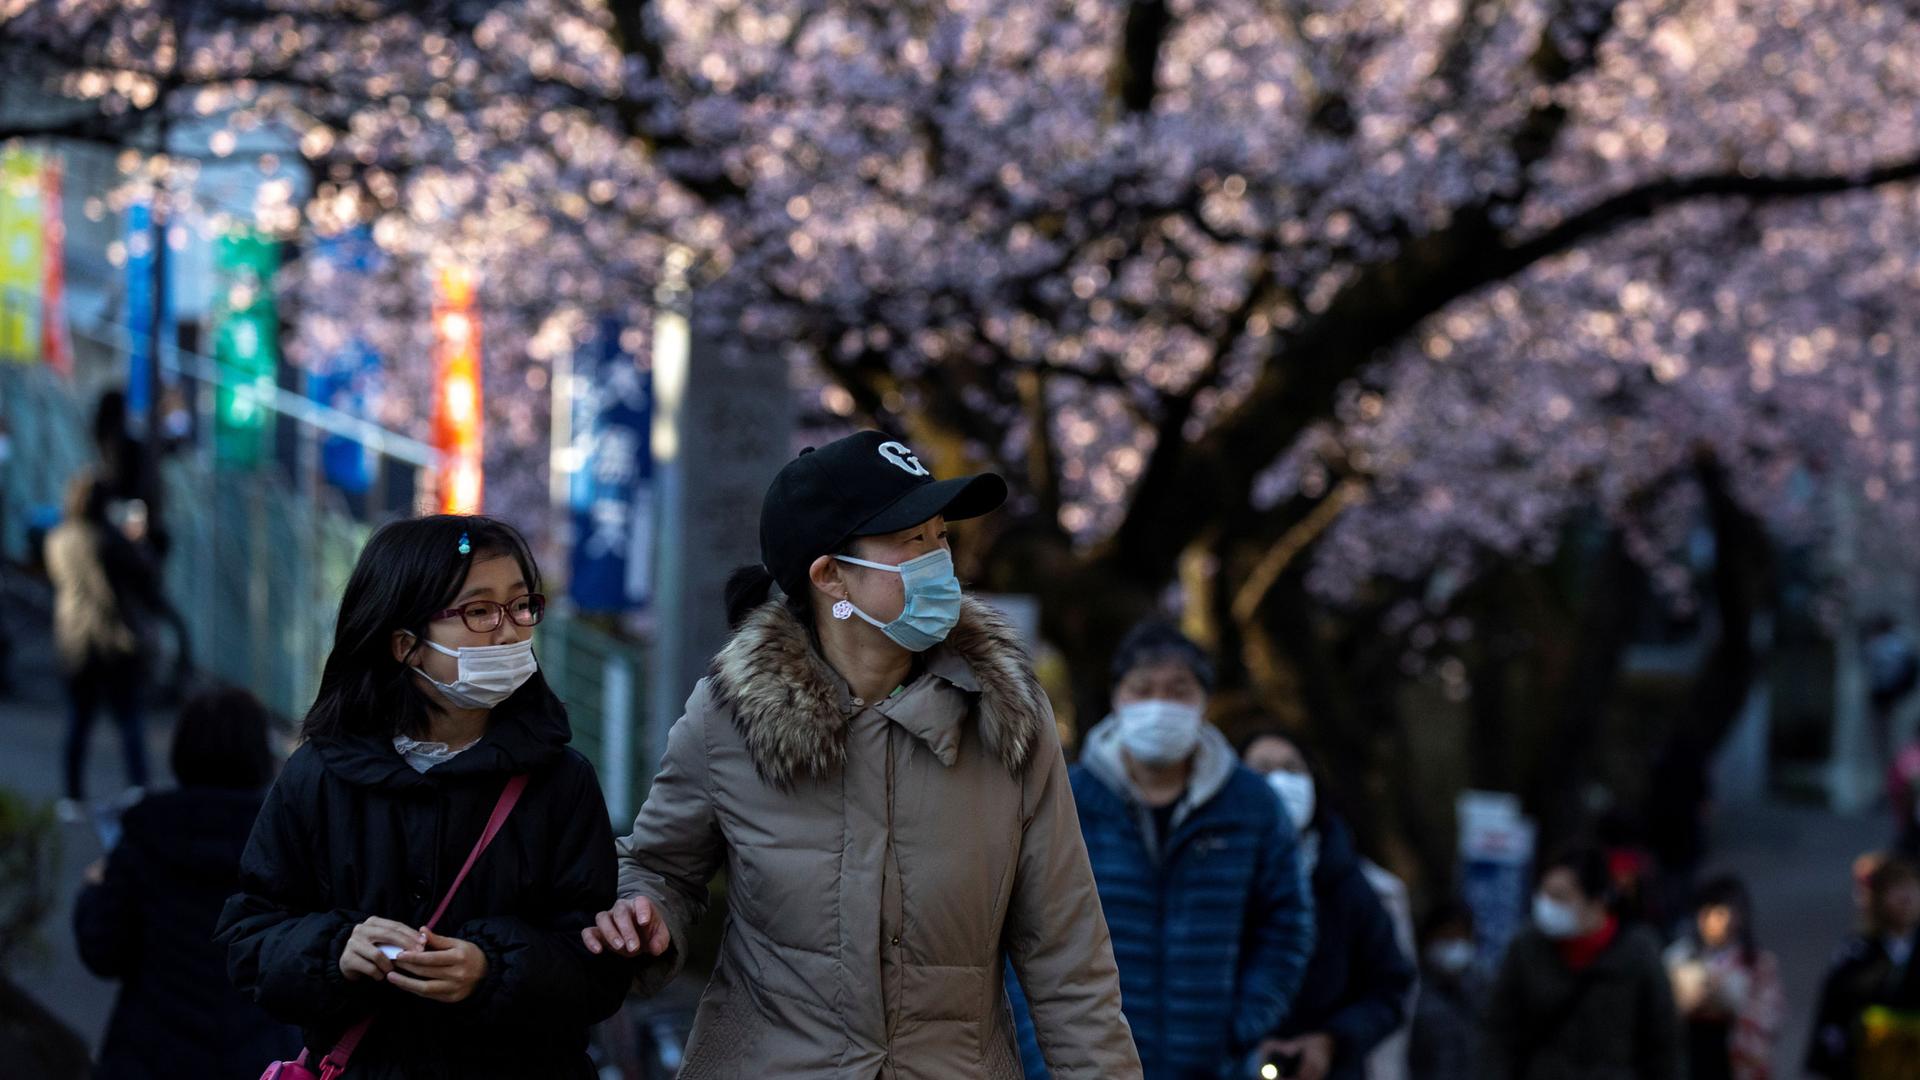 Several people are shown wearing face masks and walking near the pink blossoms of cherry trees.